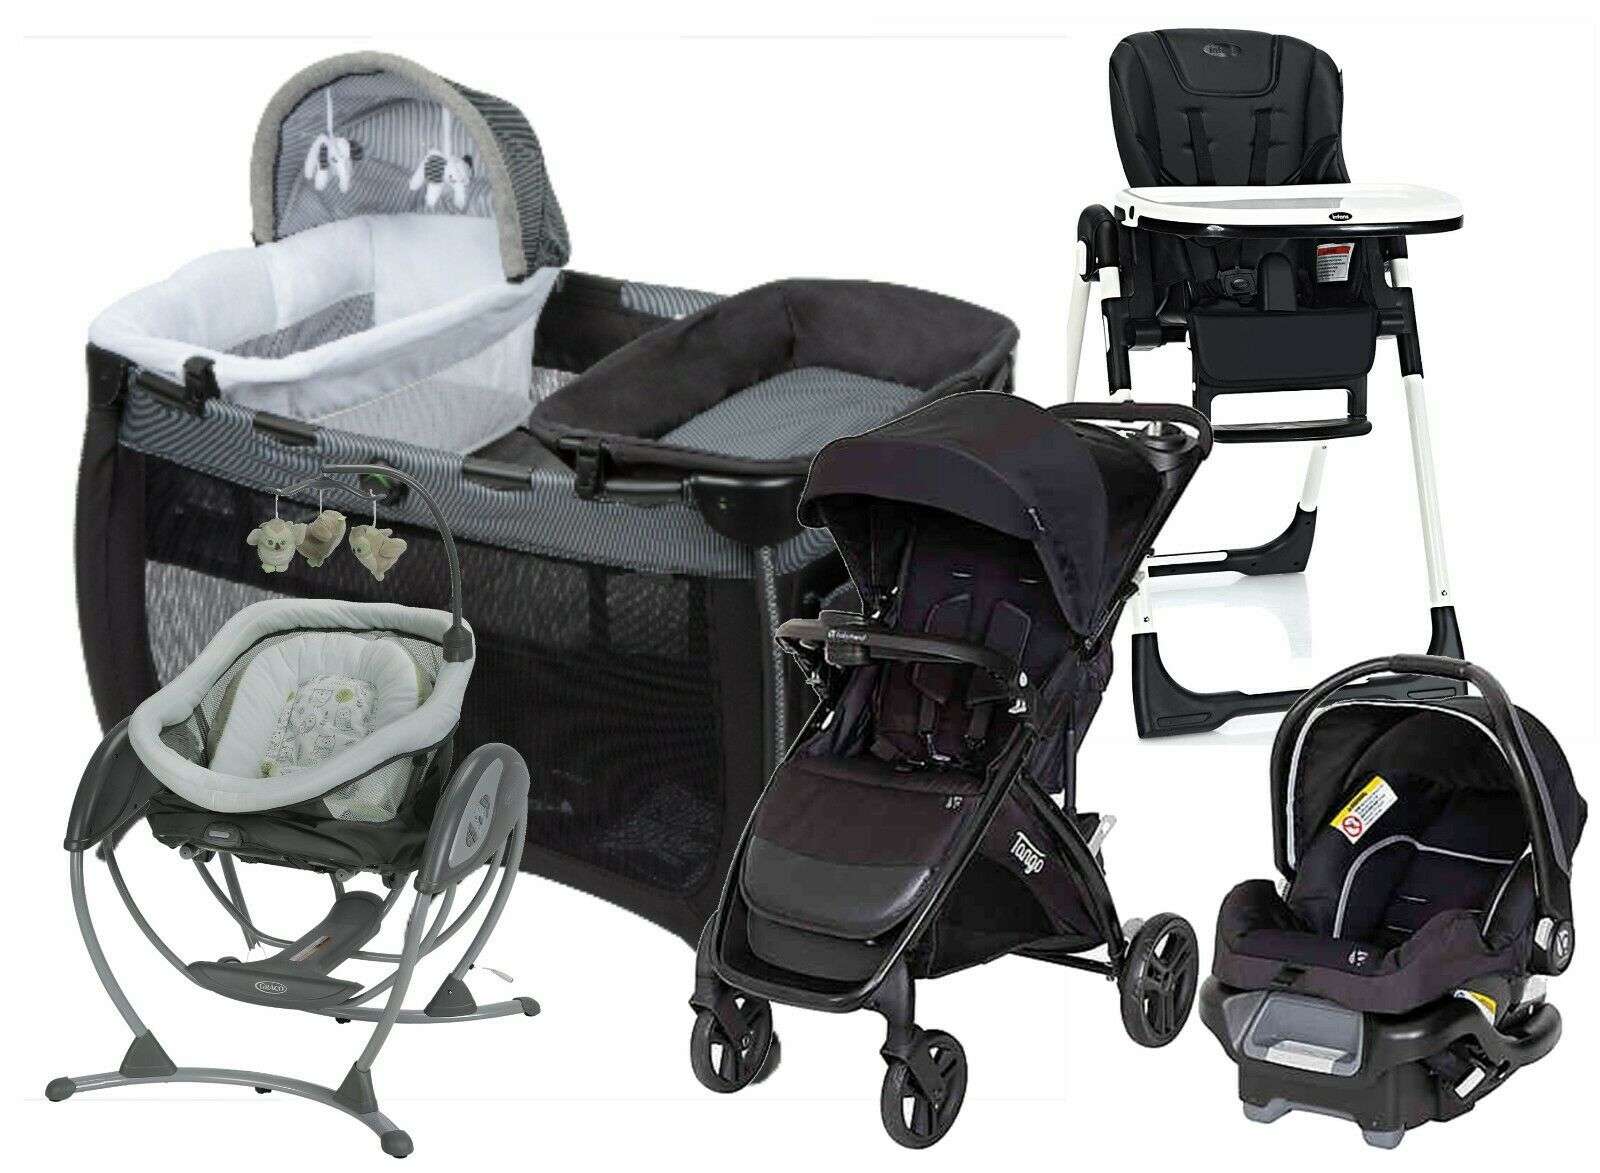 Graco Comfy Cruiser 2.0 Travel System with Infant Car Seat, Callia